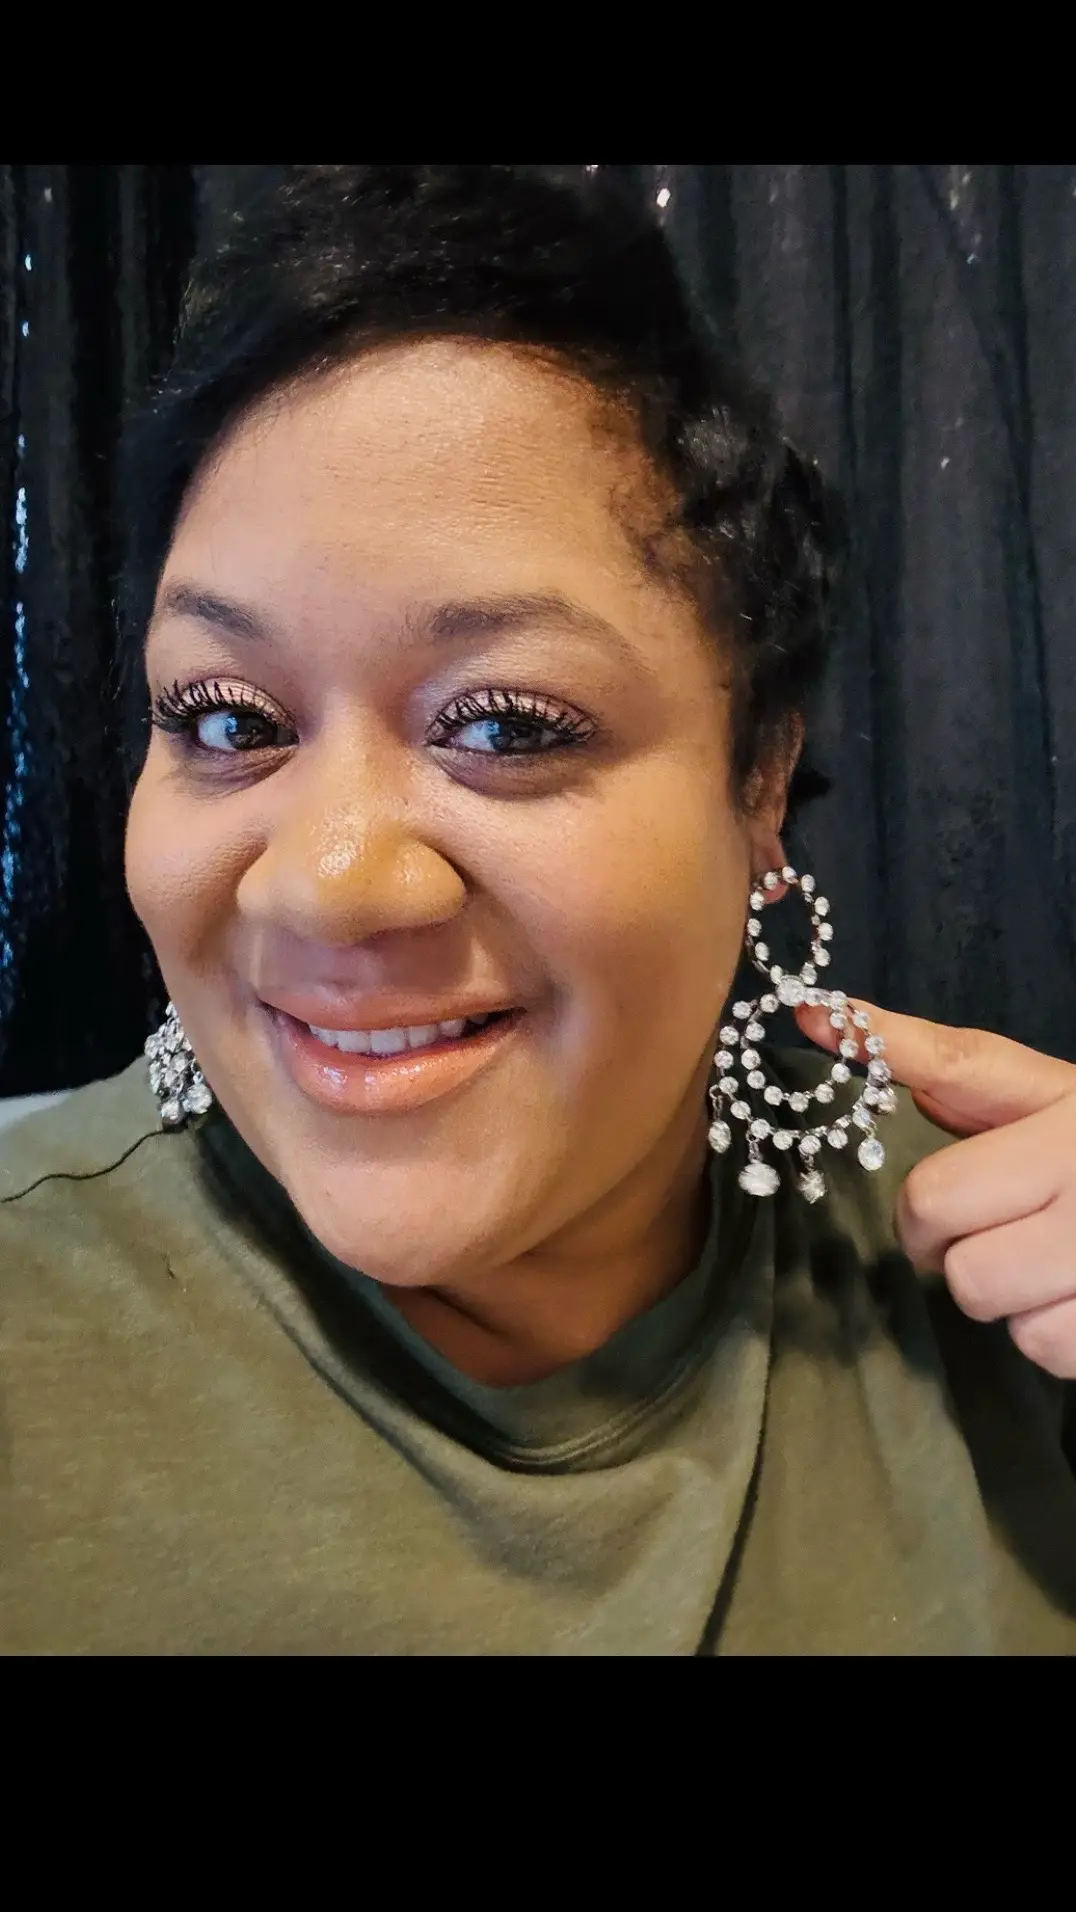 These Rhinestone Obsession esrrings and this fresh cut is everything!  #shopping #earrings #shorthair 